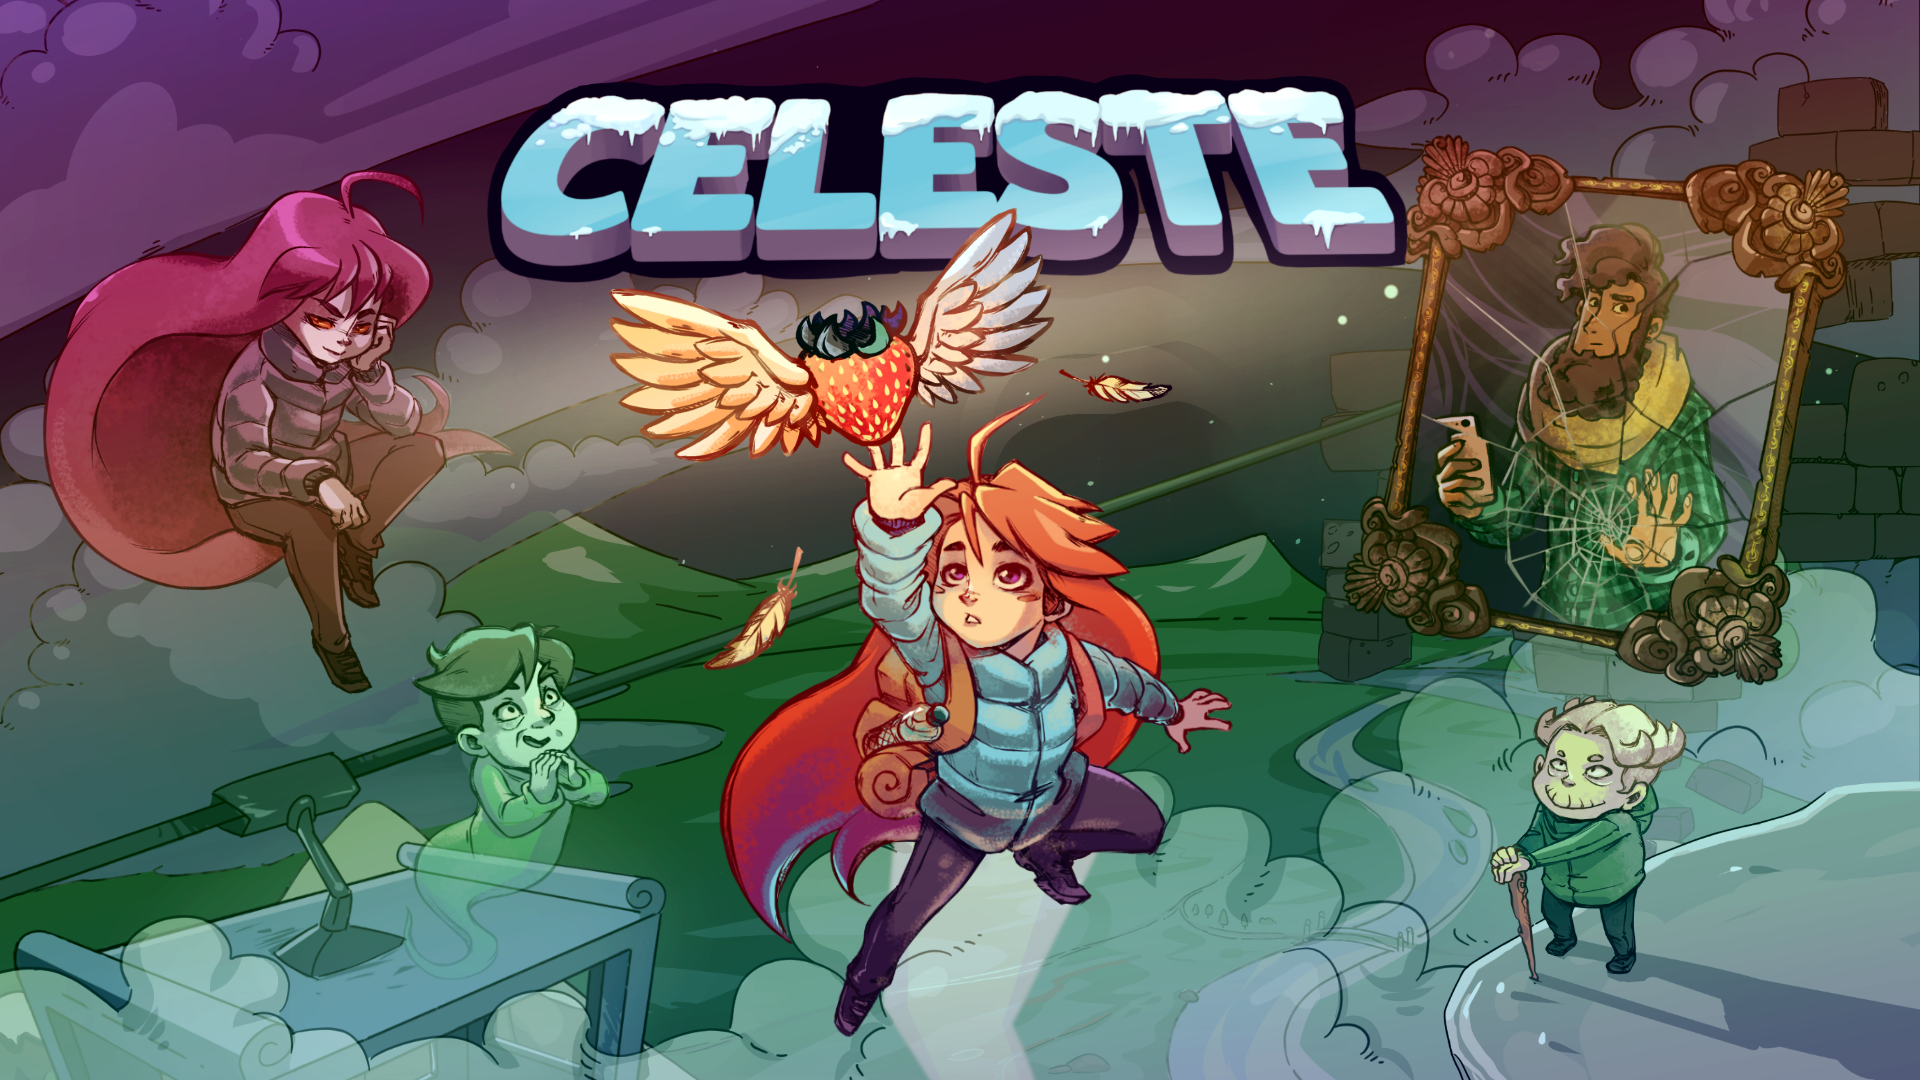 19. As our Celeste review said, Celeste is a surprise masterpiece. Its 2D platforming is some of the best and toughest since Super Meat Boy, with levels that are as challenging to figure out as they are satisfying to complete. But the greatest triumph of Celeste is that its best-in-class jumping and dashing is blended beautifully with an important and sincere story and an incredible soundtrack that make it a genuinely emotional game, even when your feet are planted firmly on the ground.